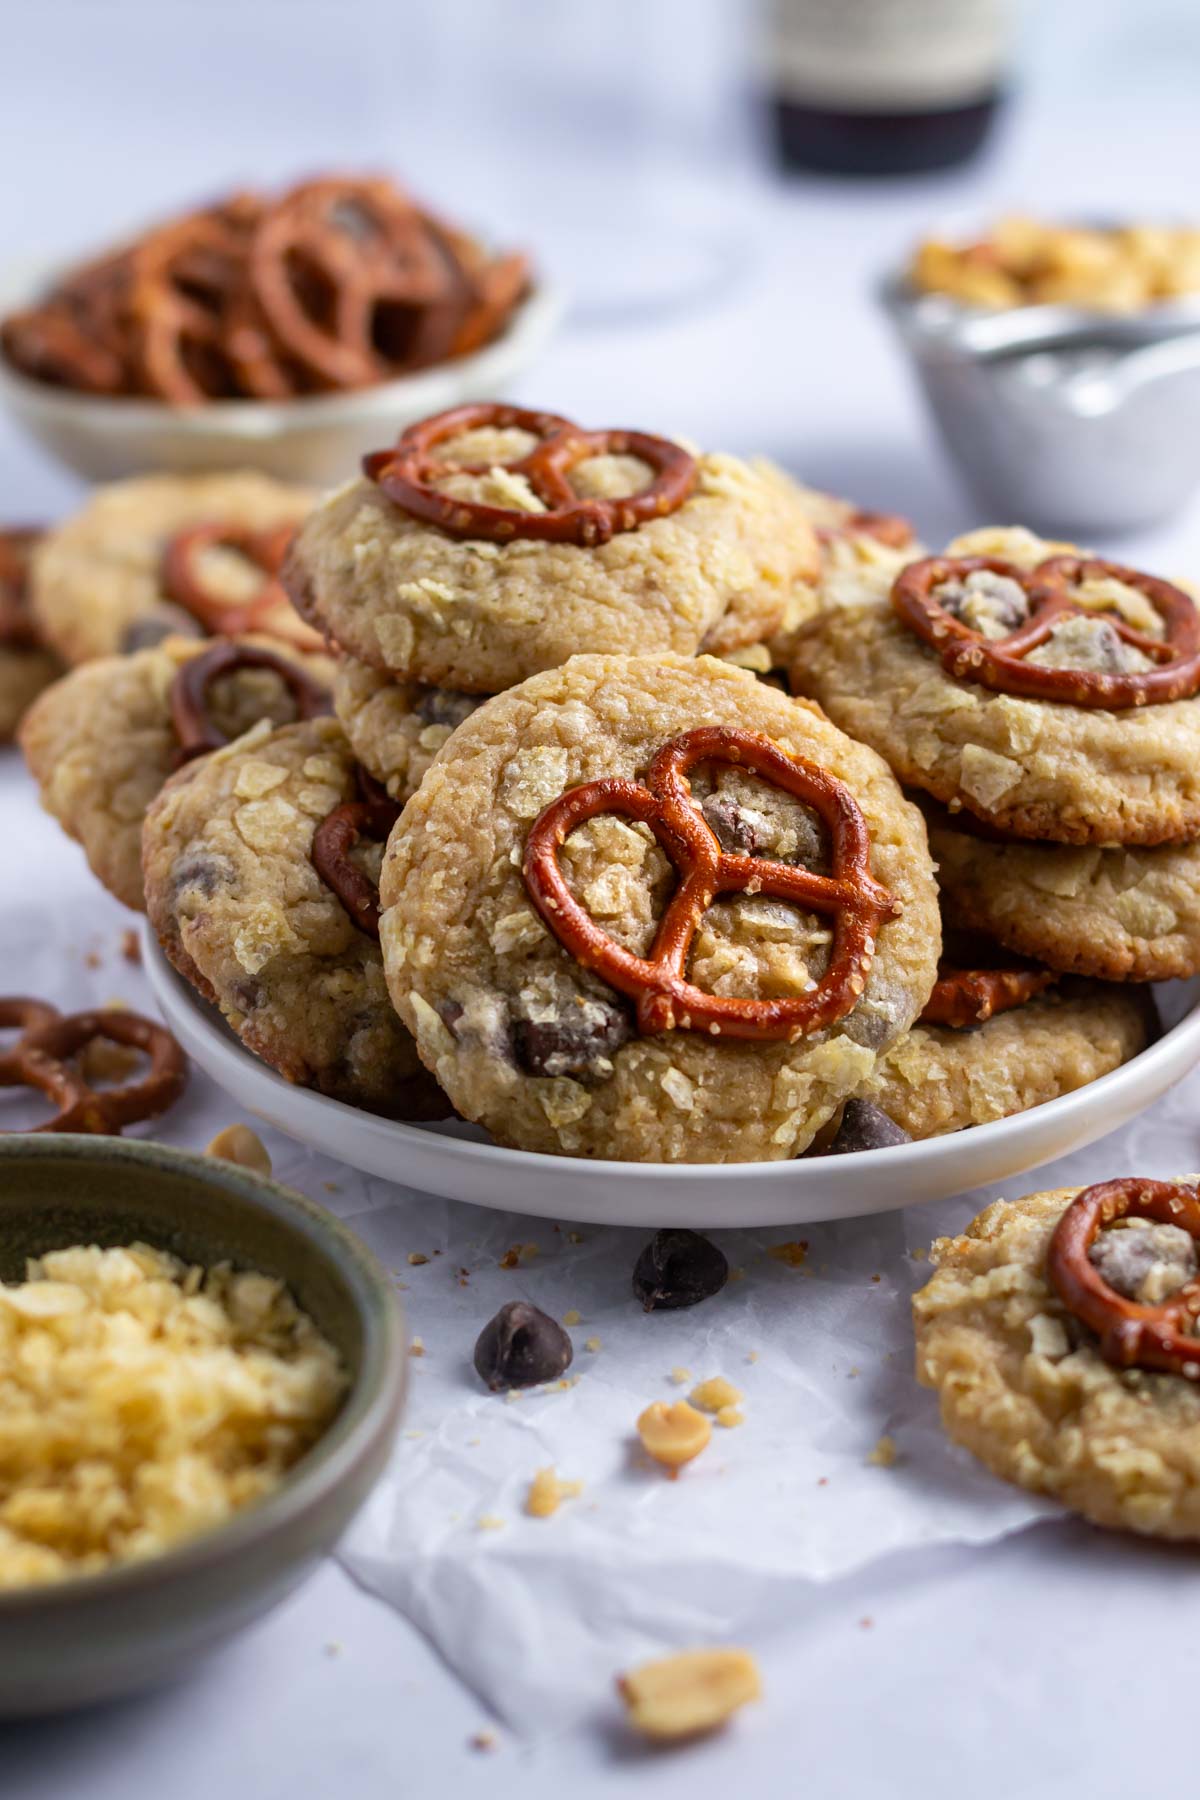 plate of cookies with pretzels and peanuts in the background